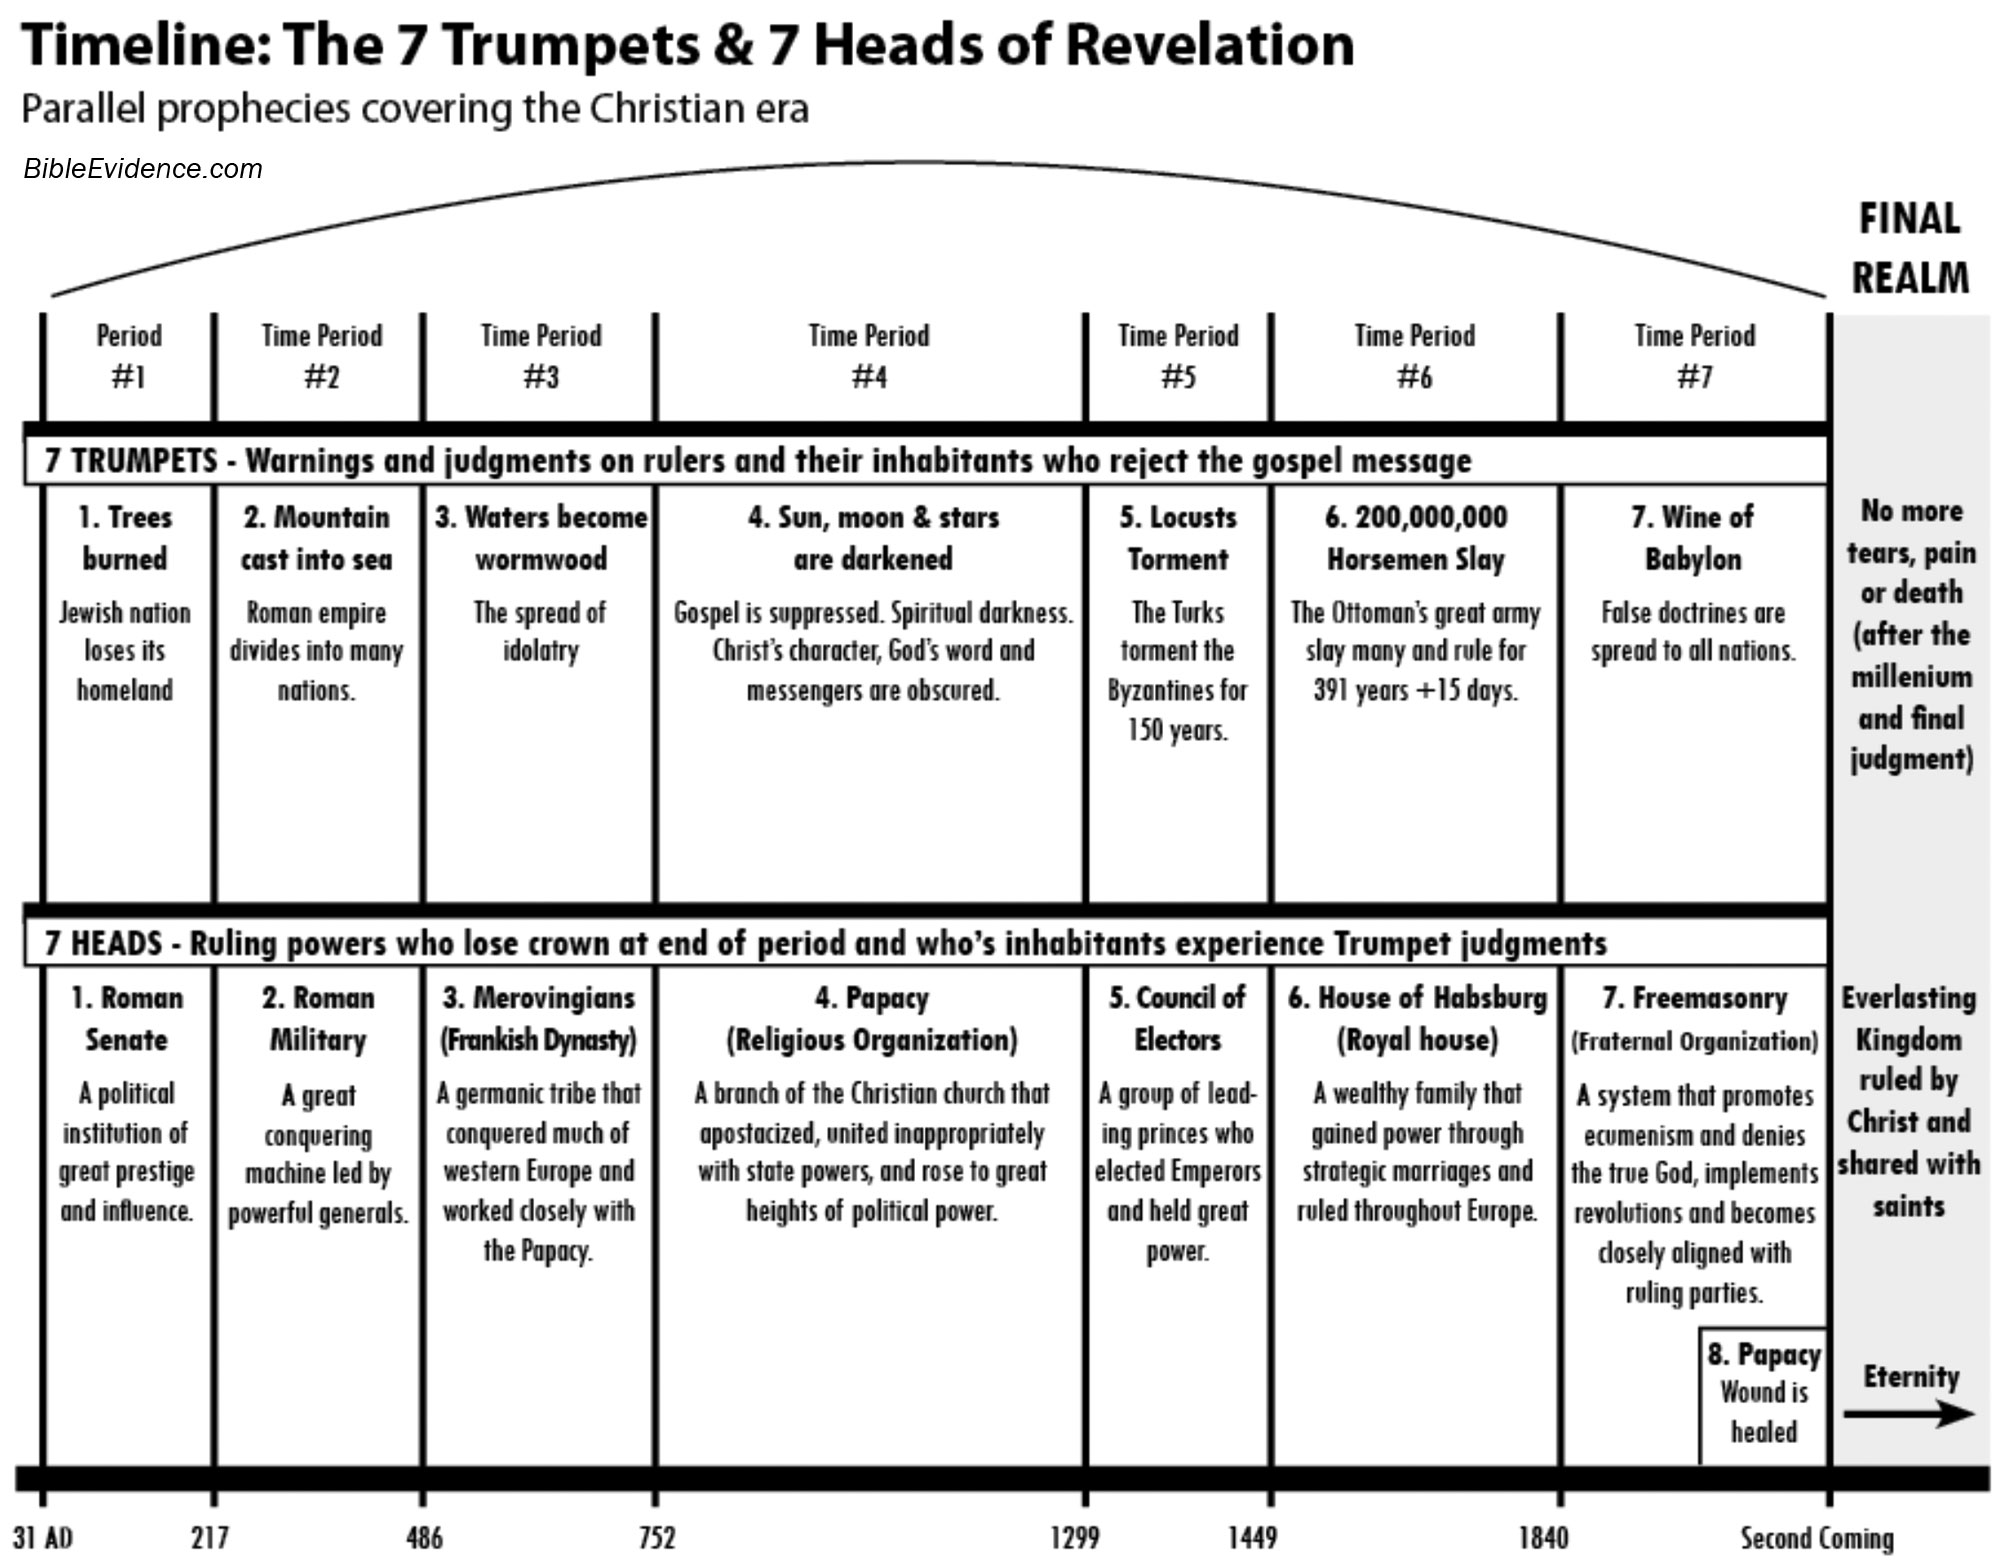 Timline of the 7 Trumpets and 7 Heads of Revelation